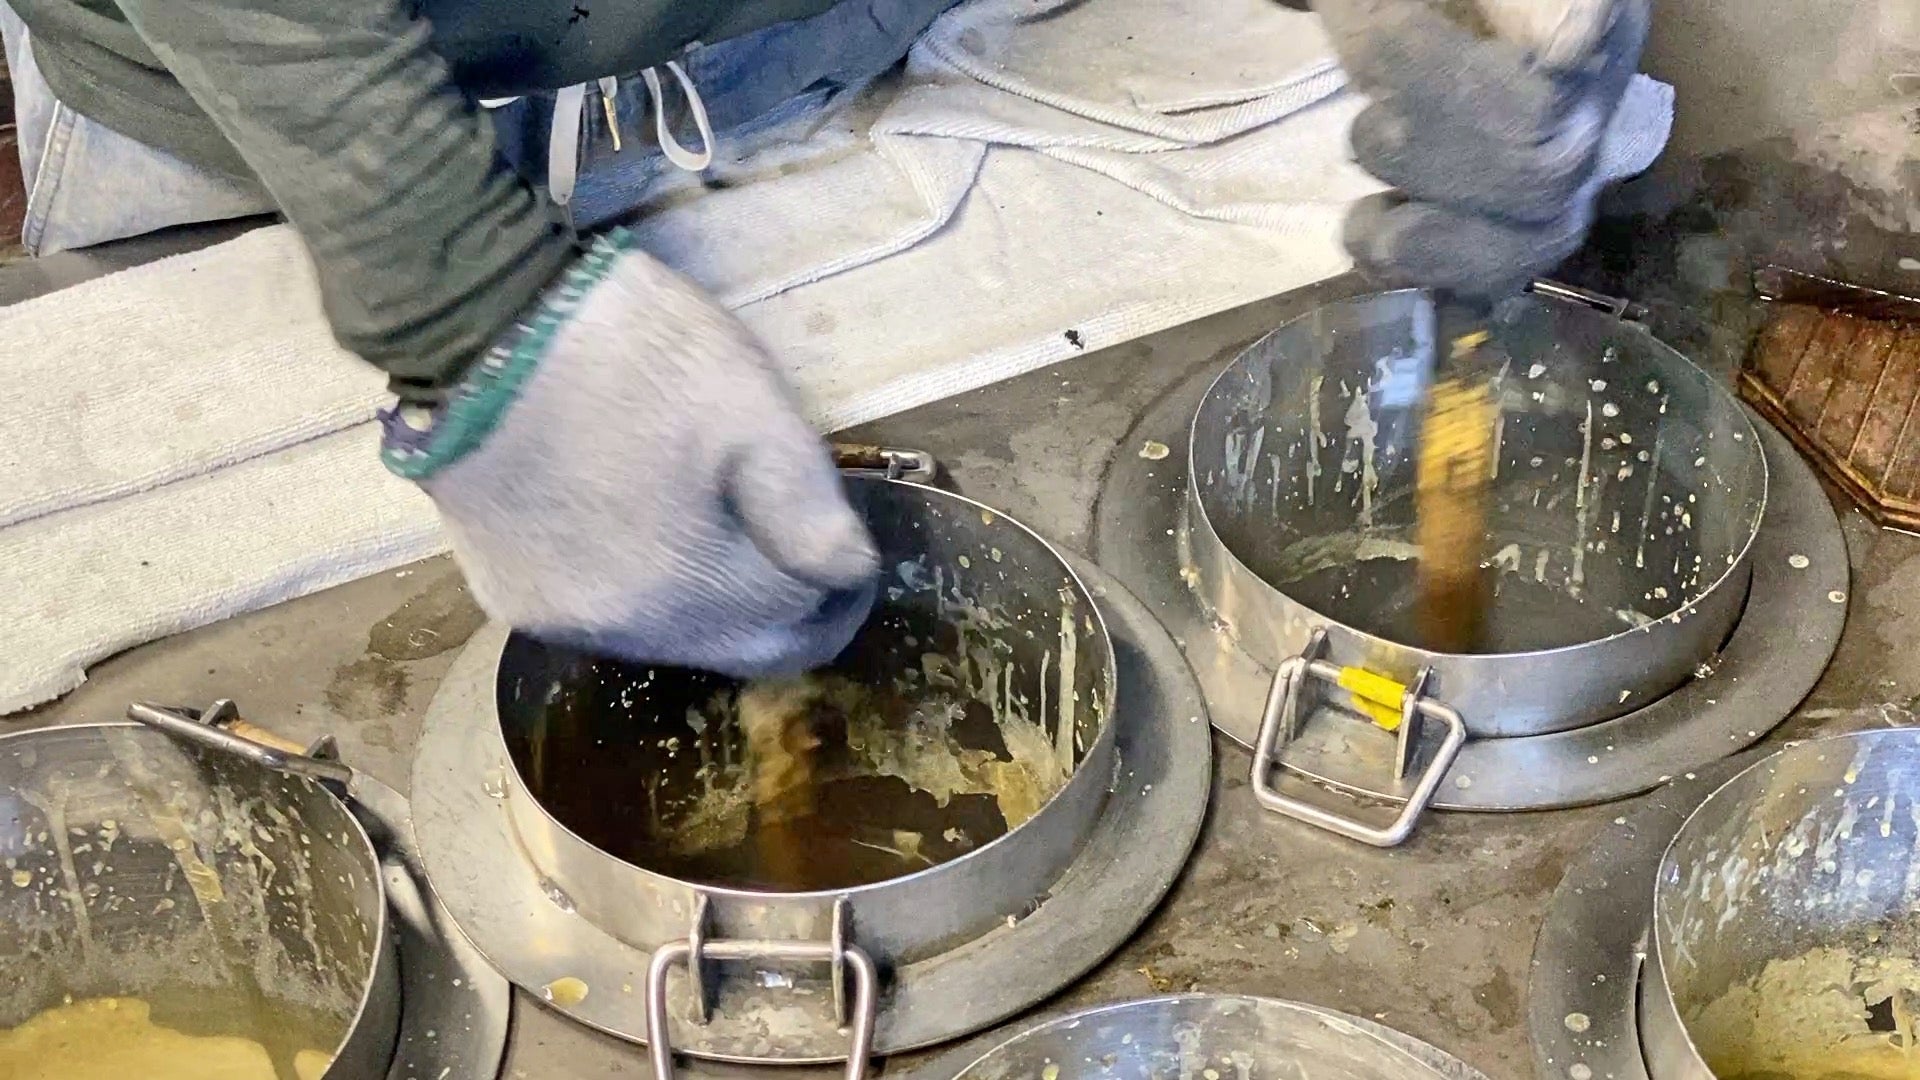 This is where the glue used to make the ink is boiled.